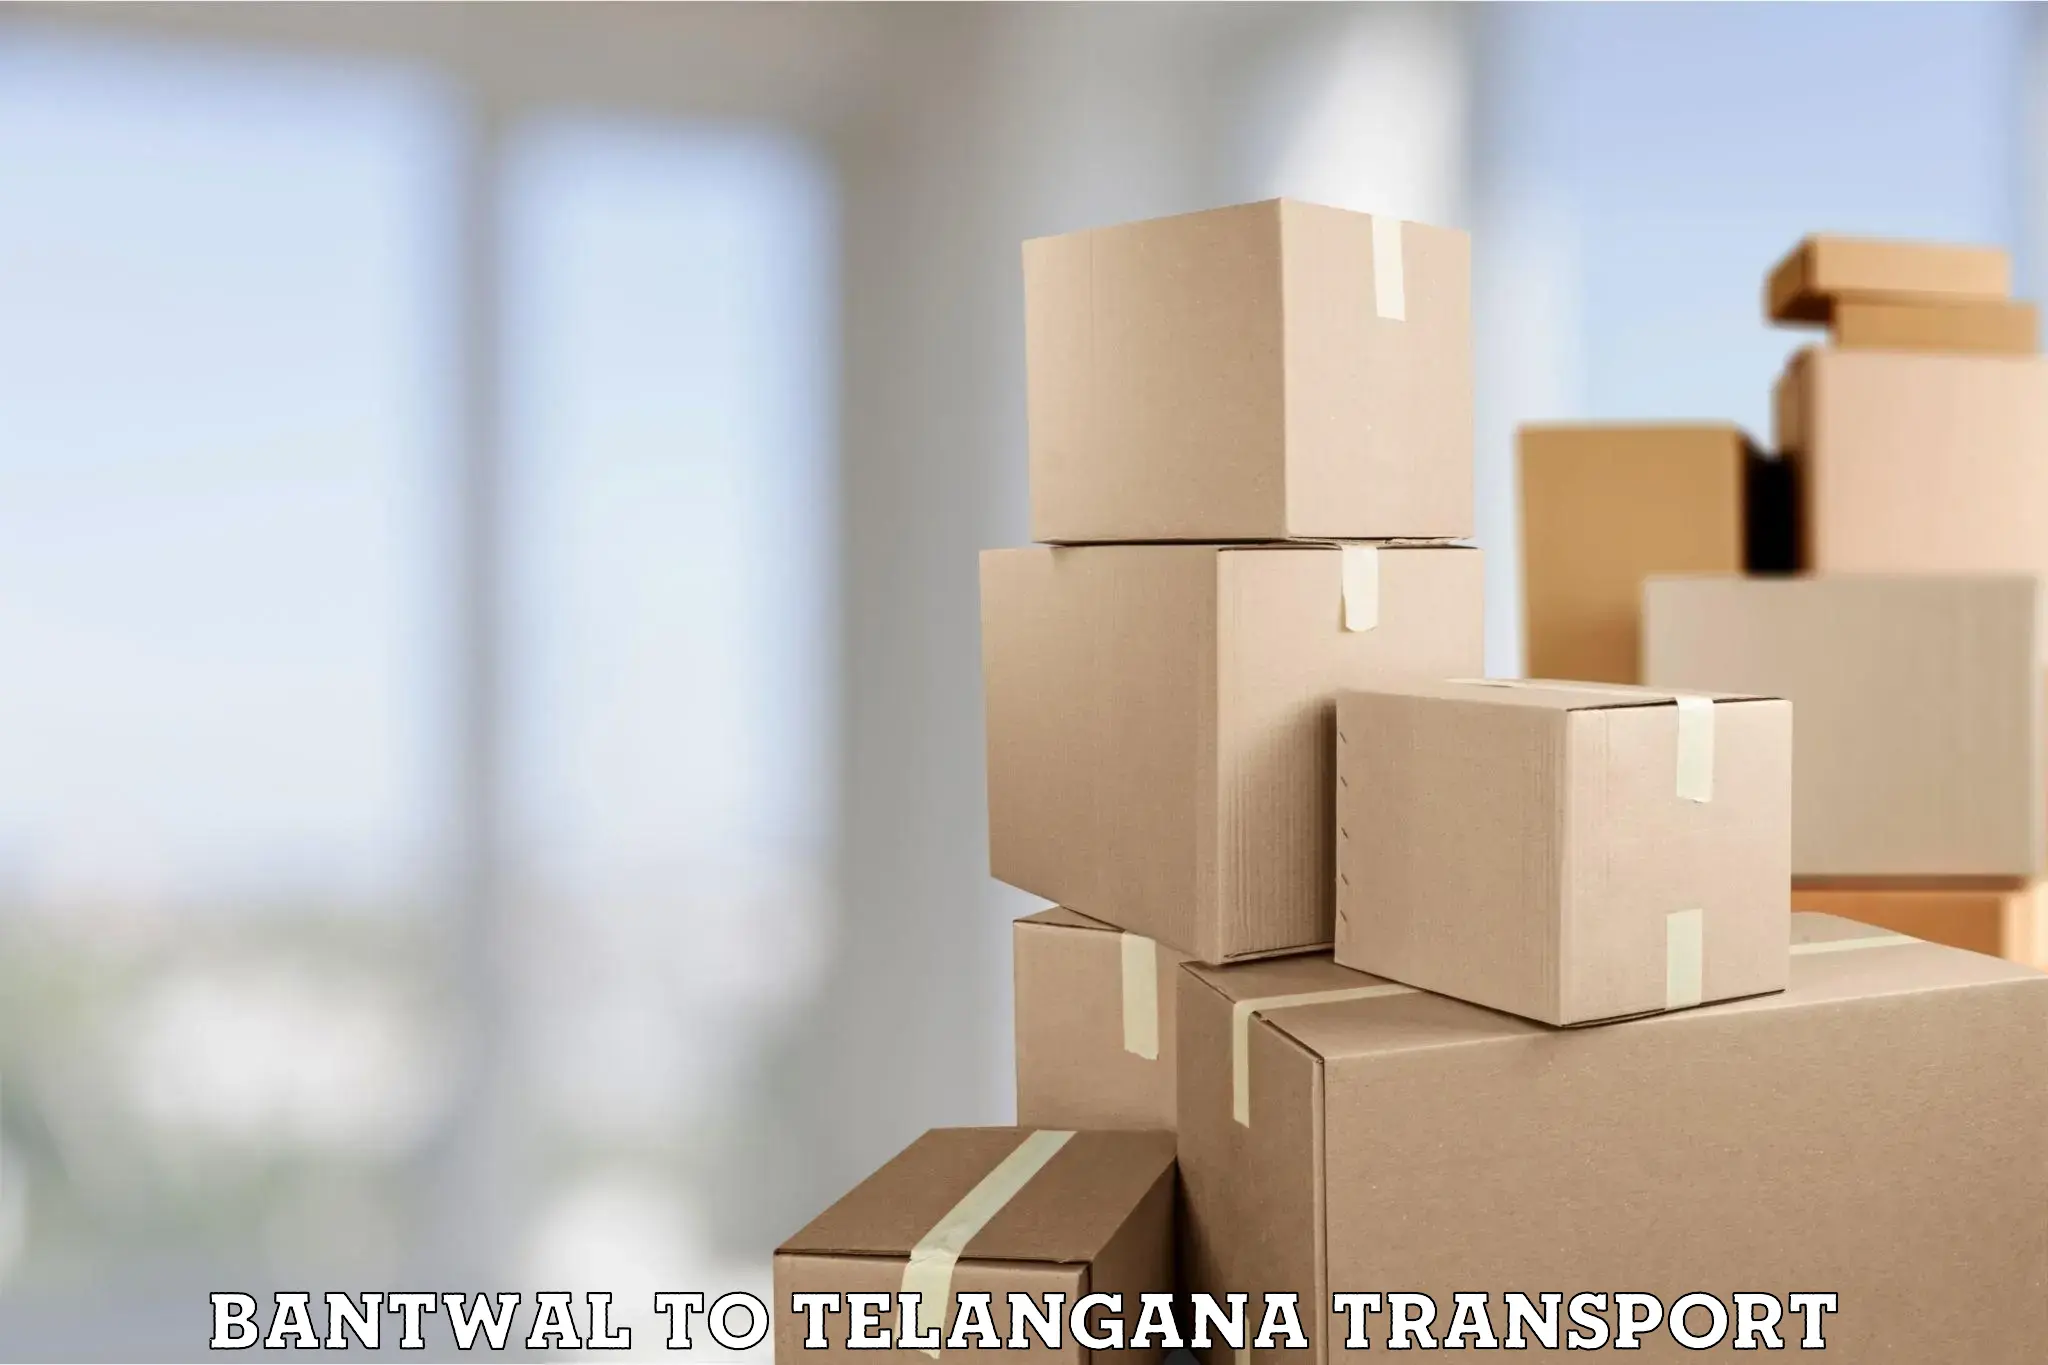 Cargo train transport services in Bantwal to Telangana